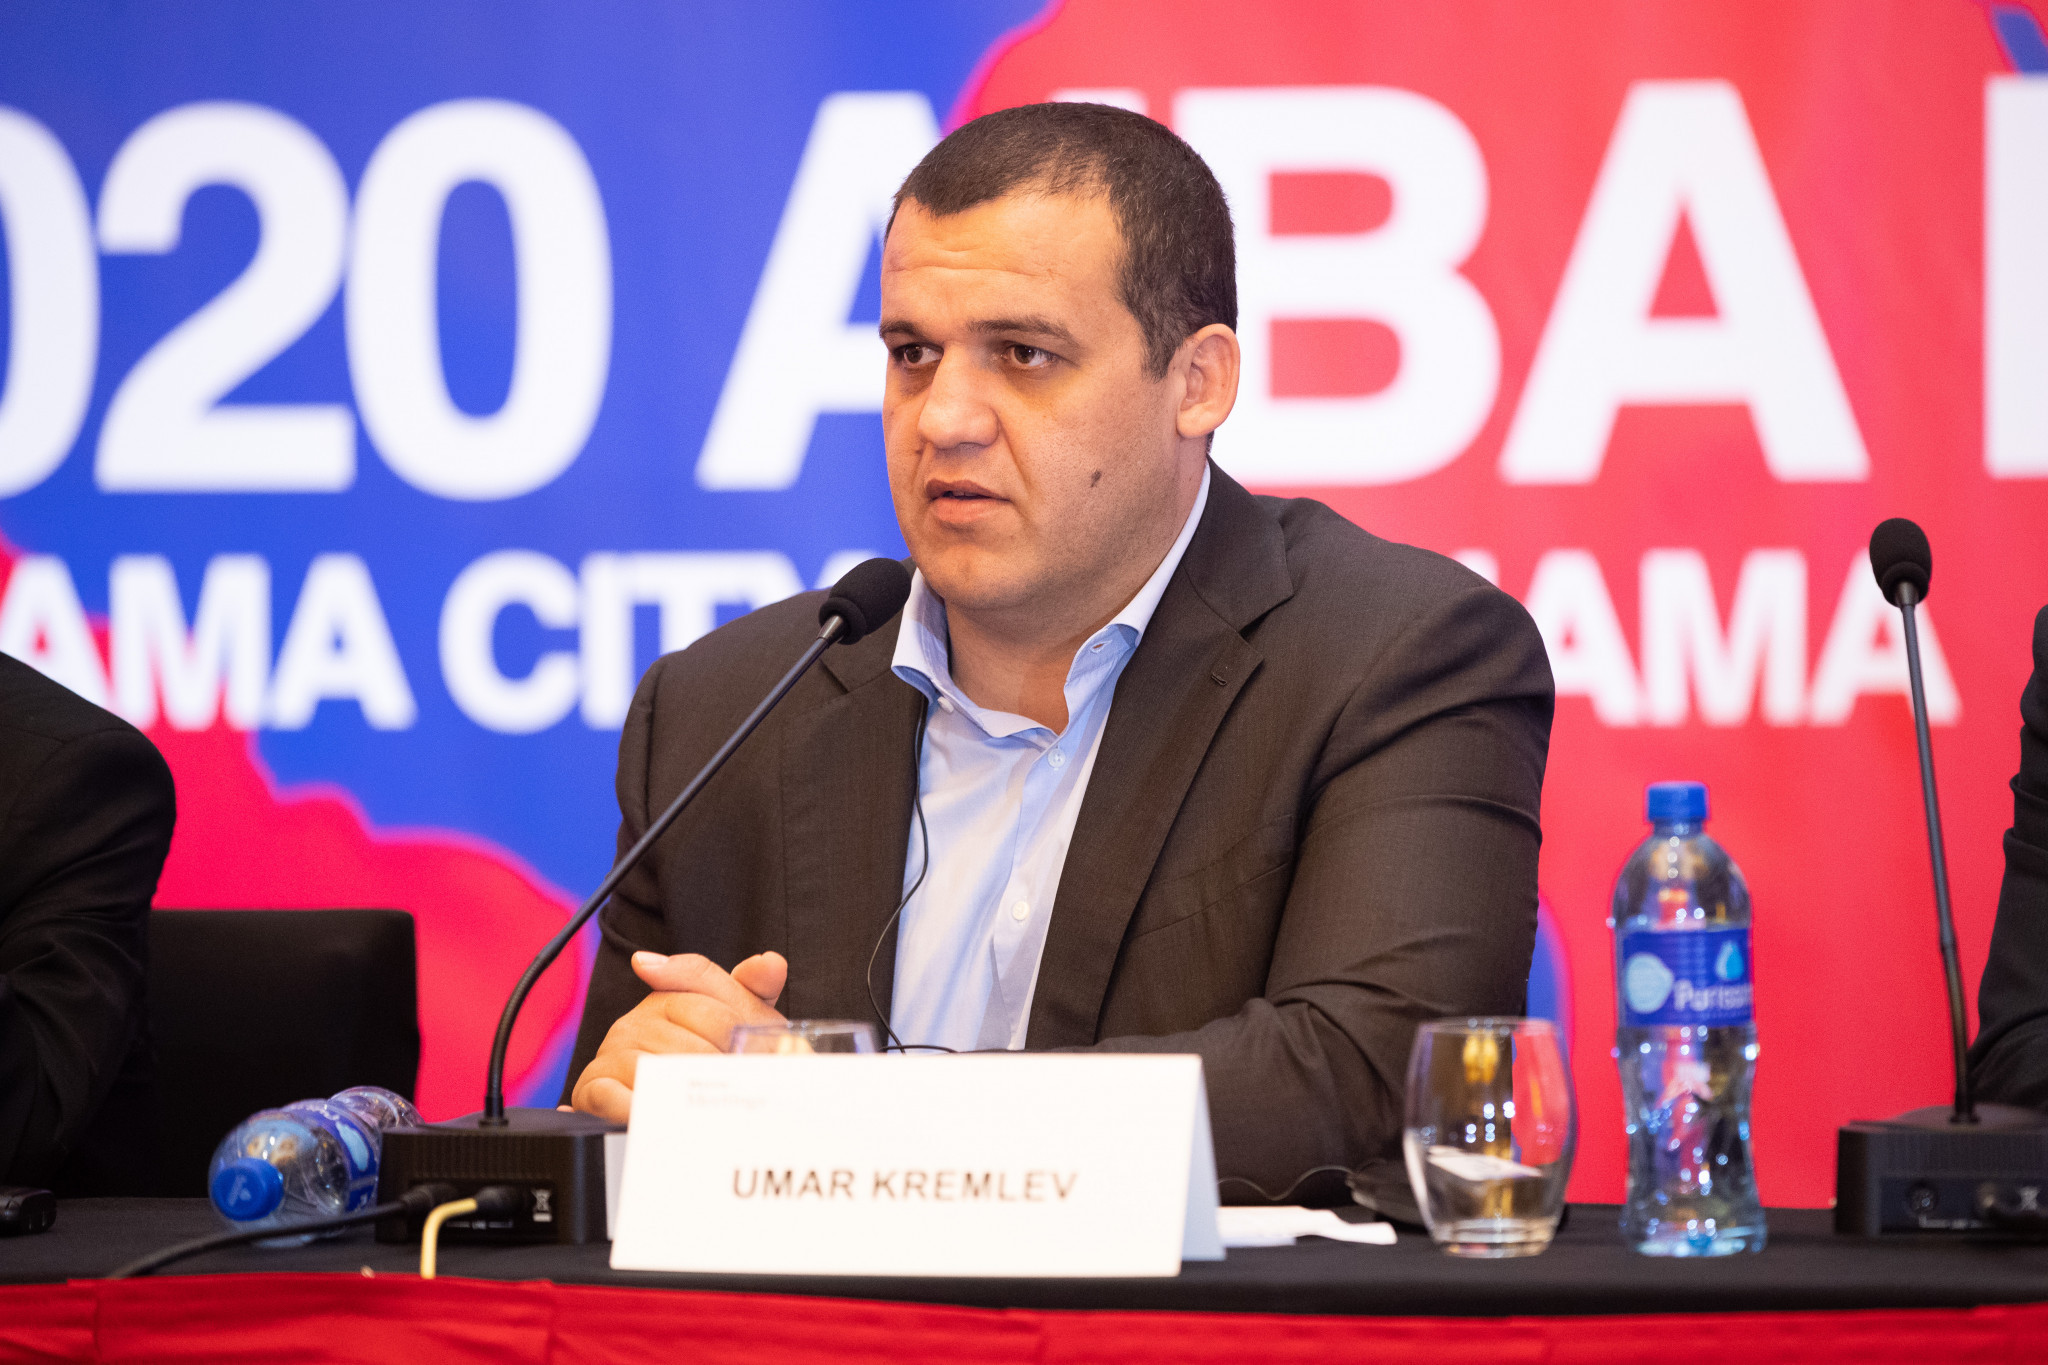 Exclusive: Kremlev claims Continental Forums give IOC "no reason to not reinstate AIBA"